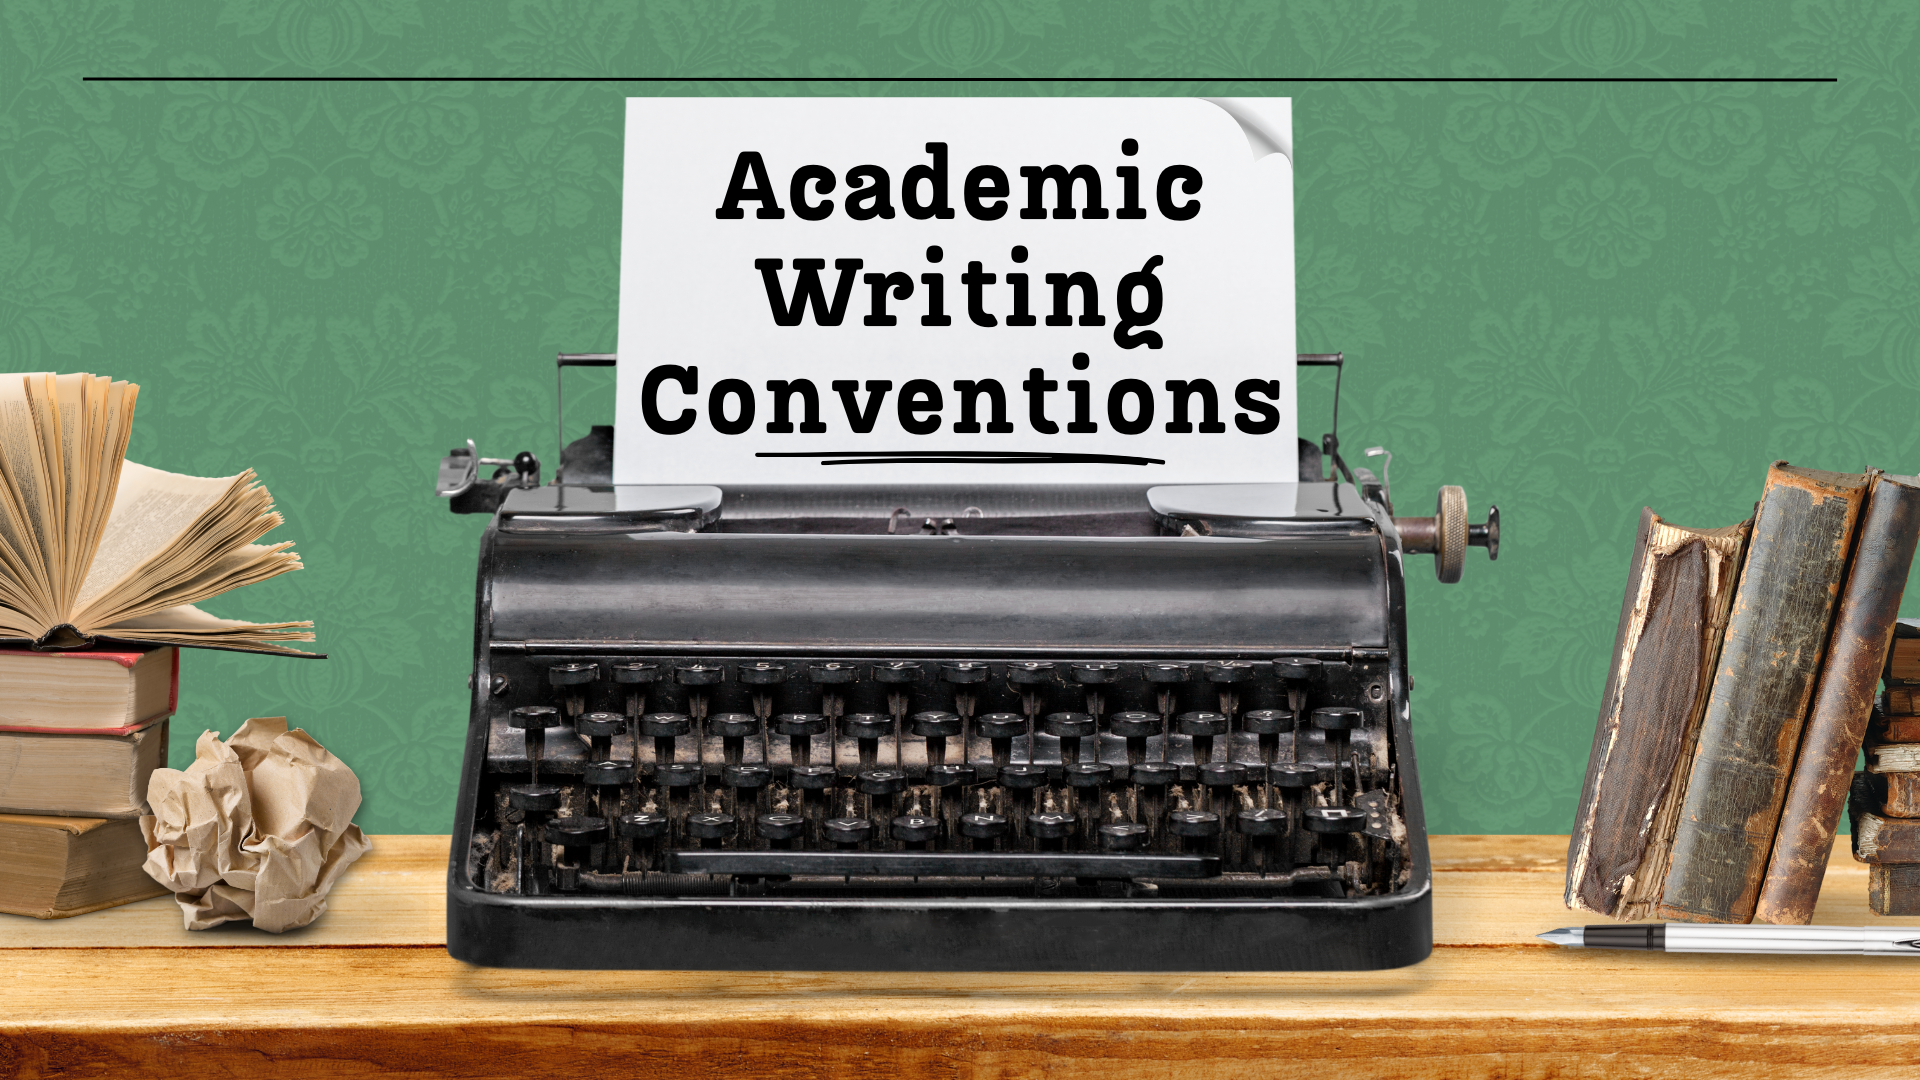 ACADEMIC WRITING CONVENTIONS